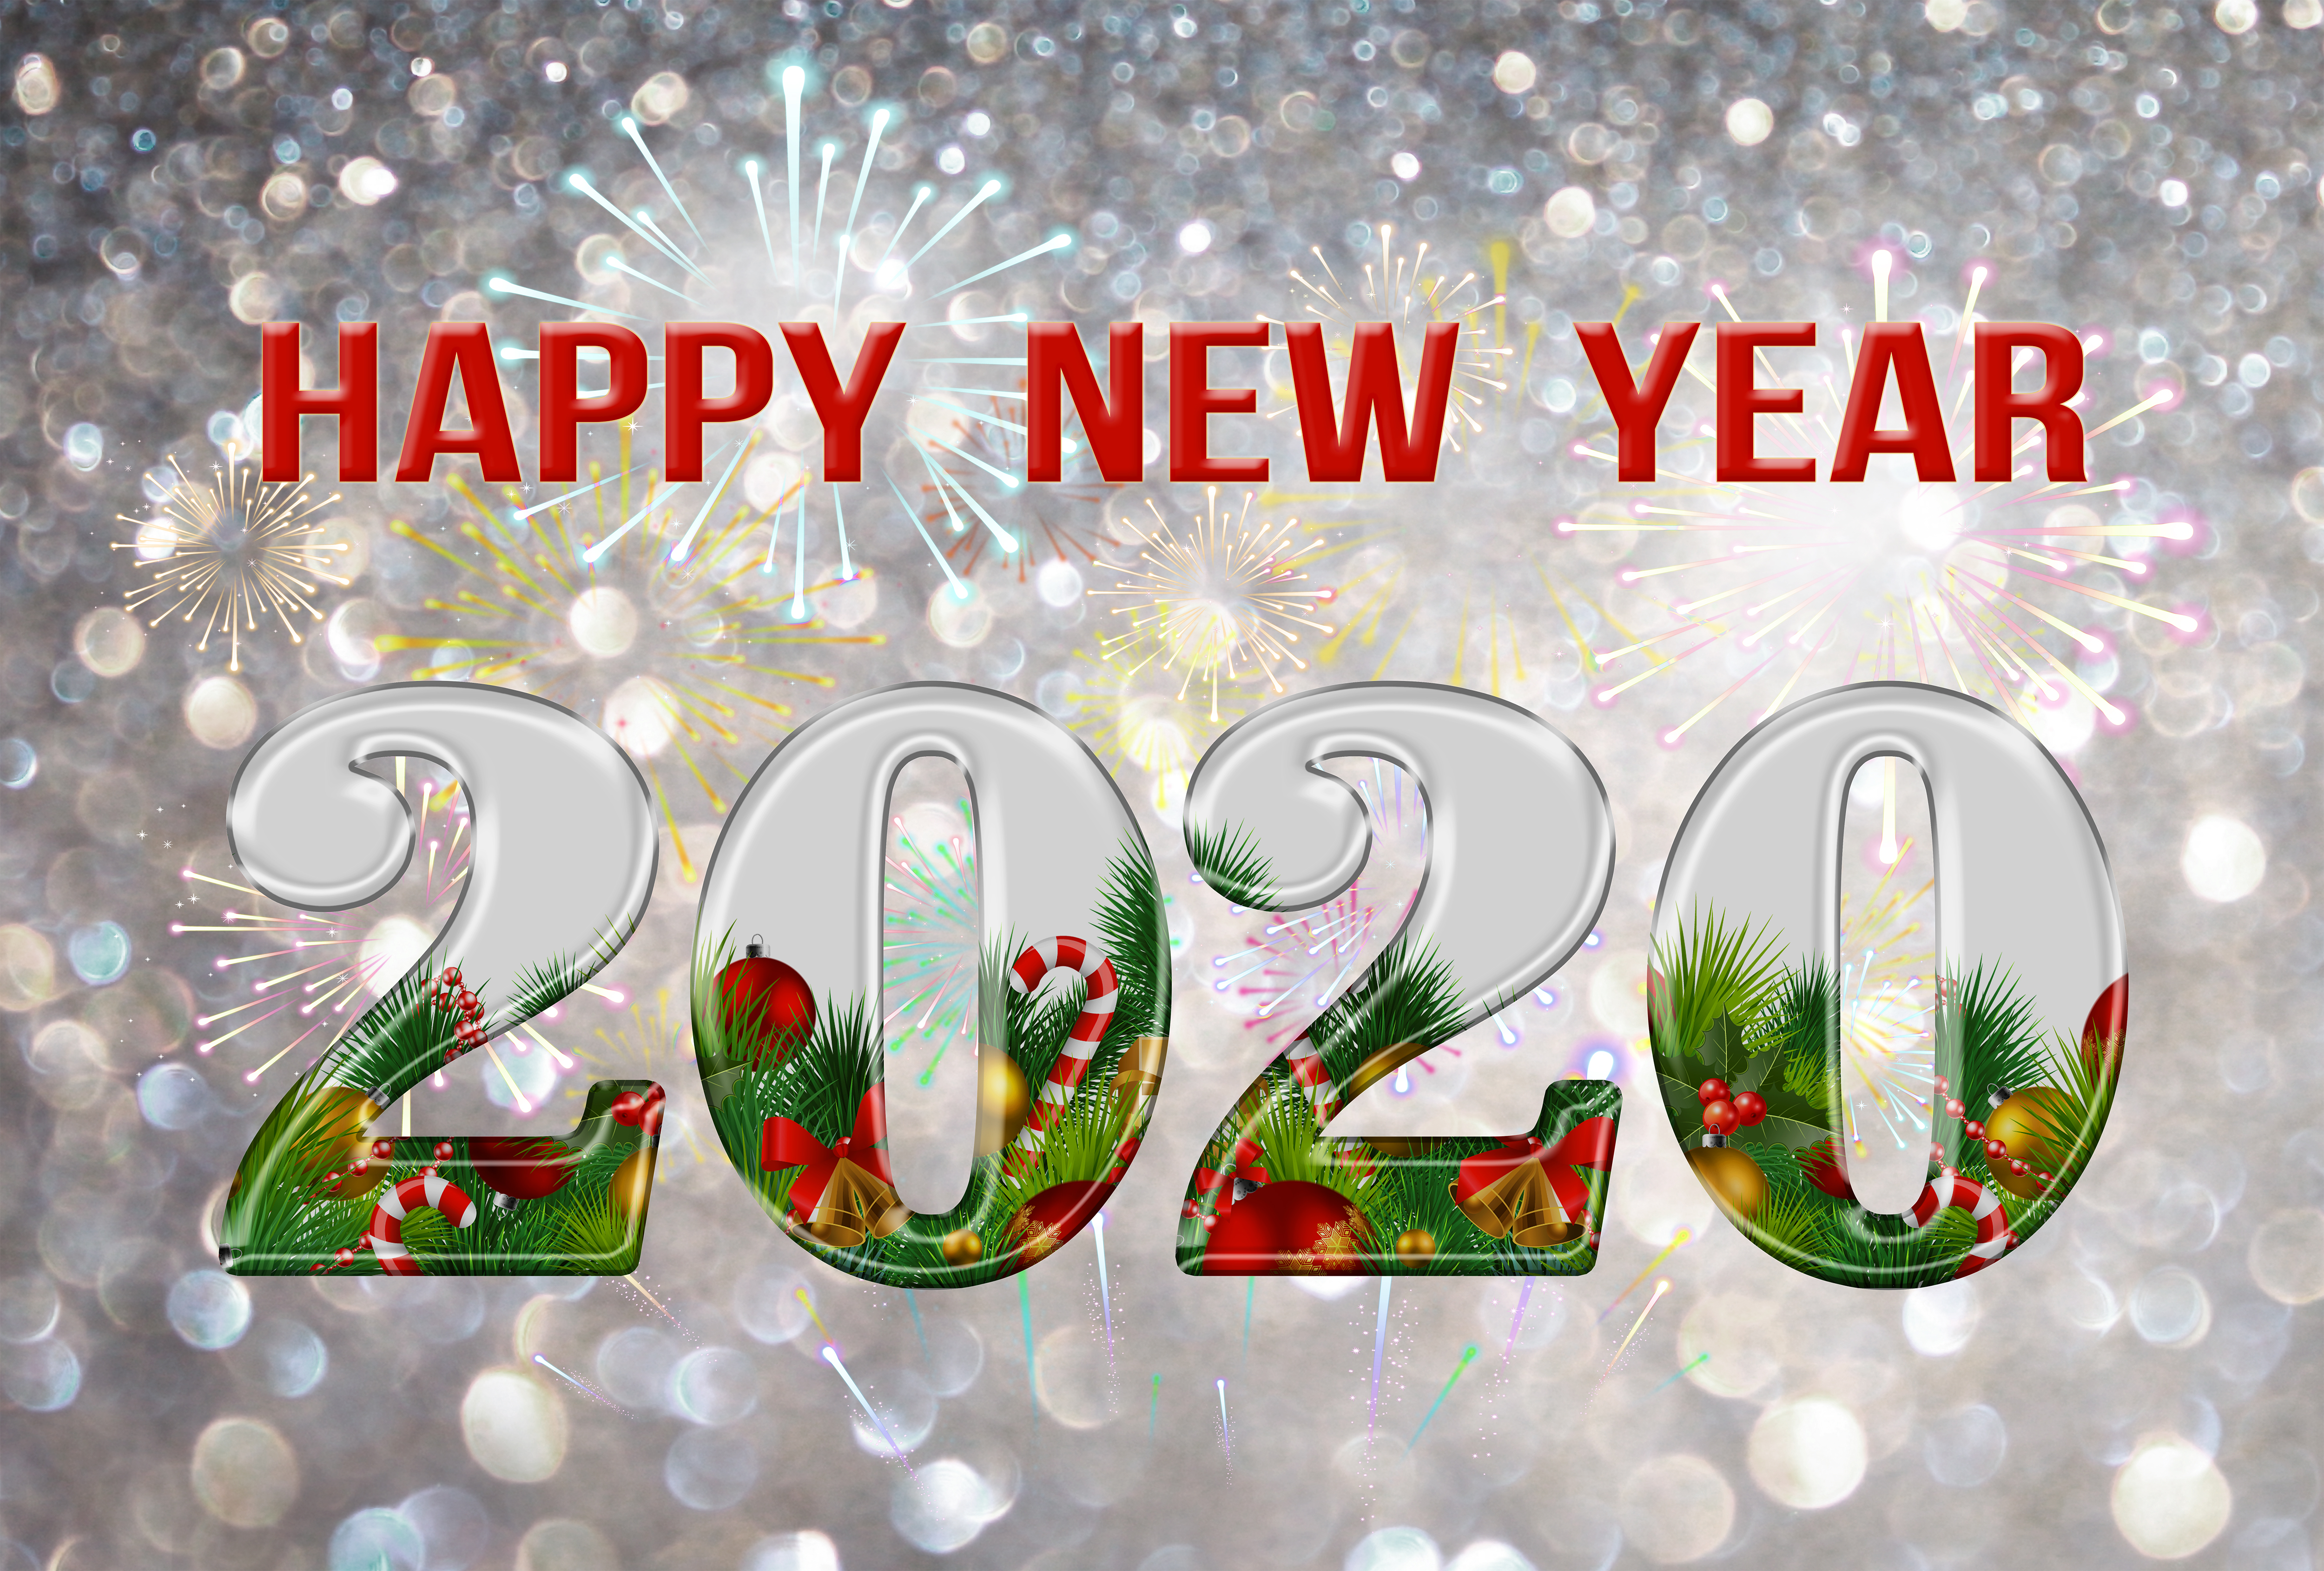 Happy New Year 2020 Background Gallery Yopriceville High